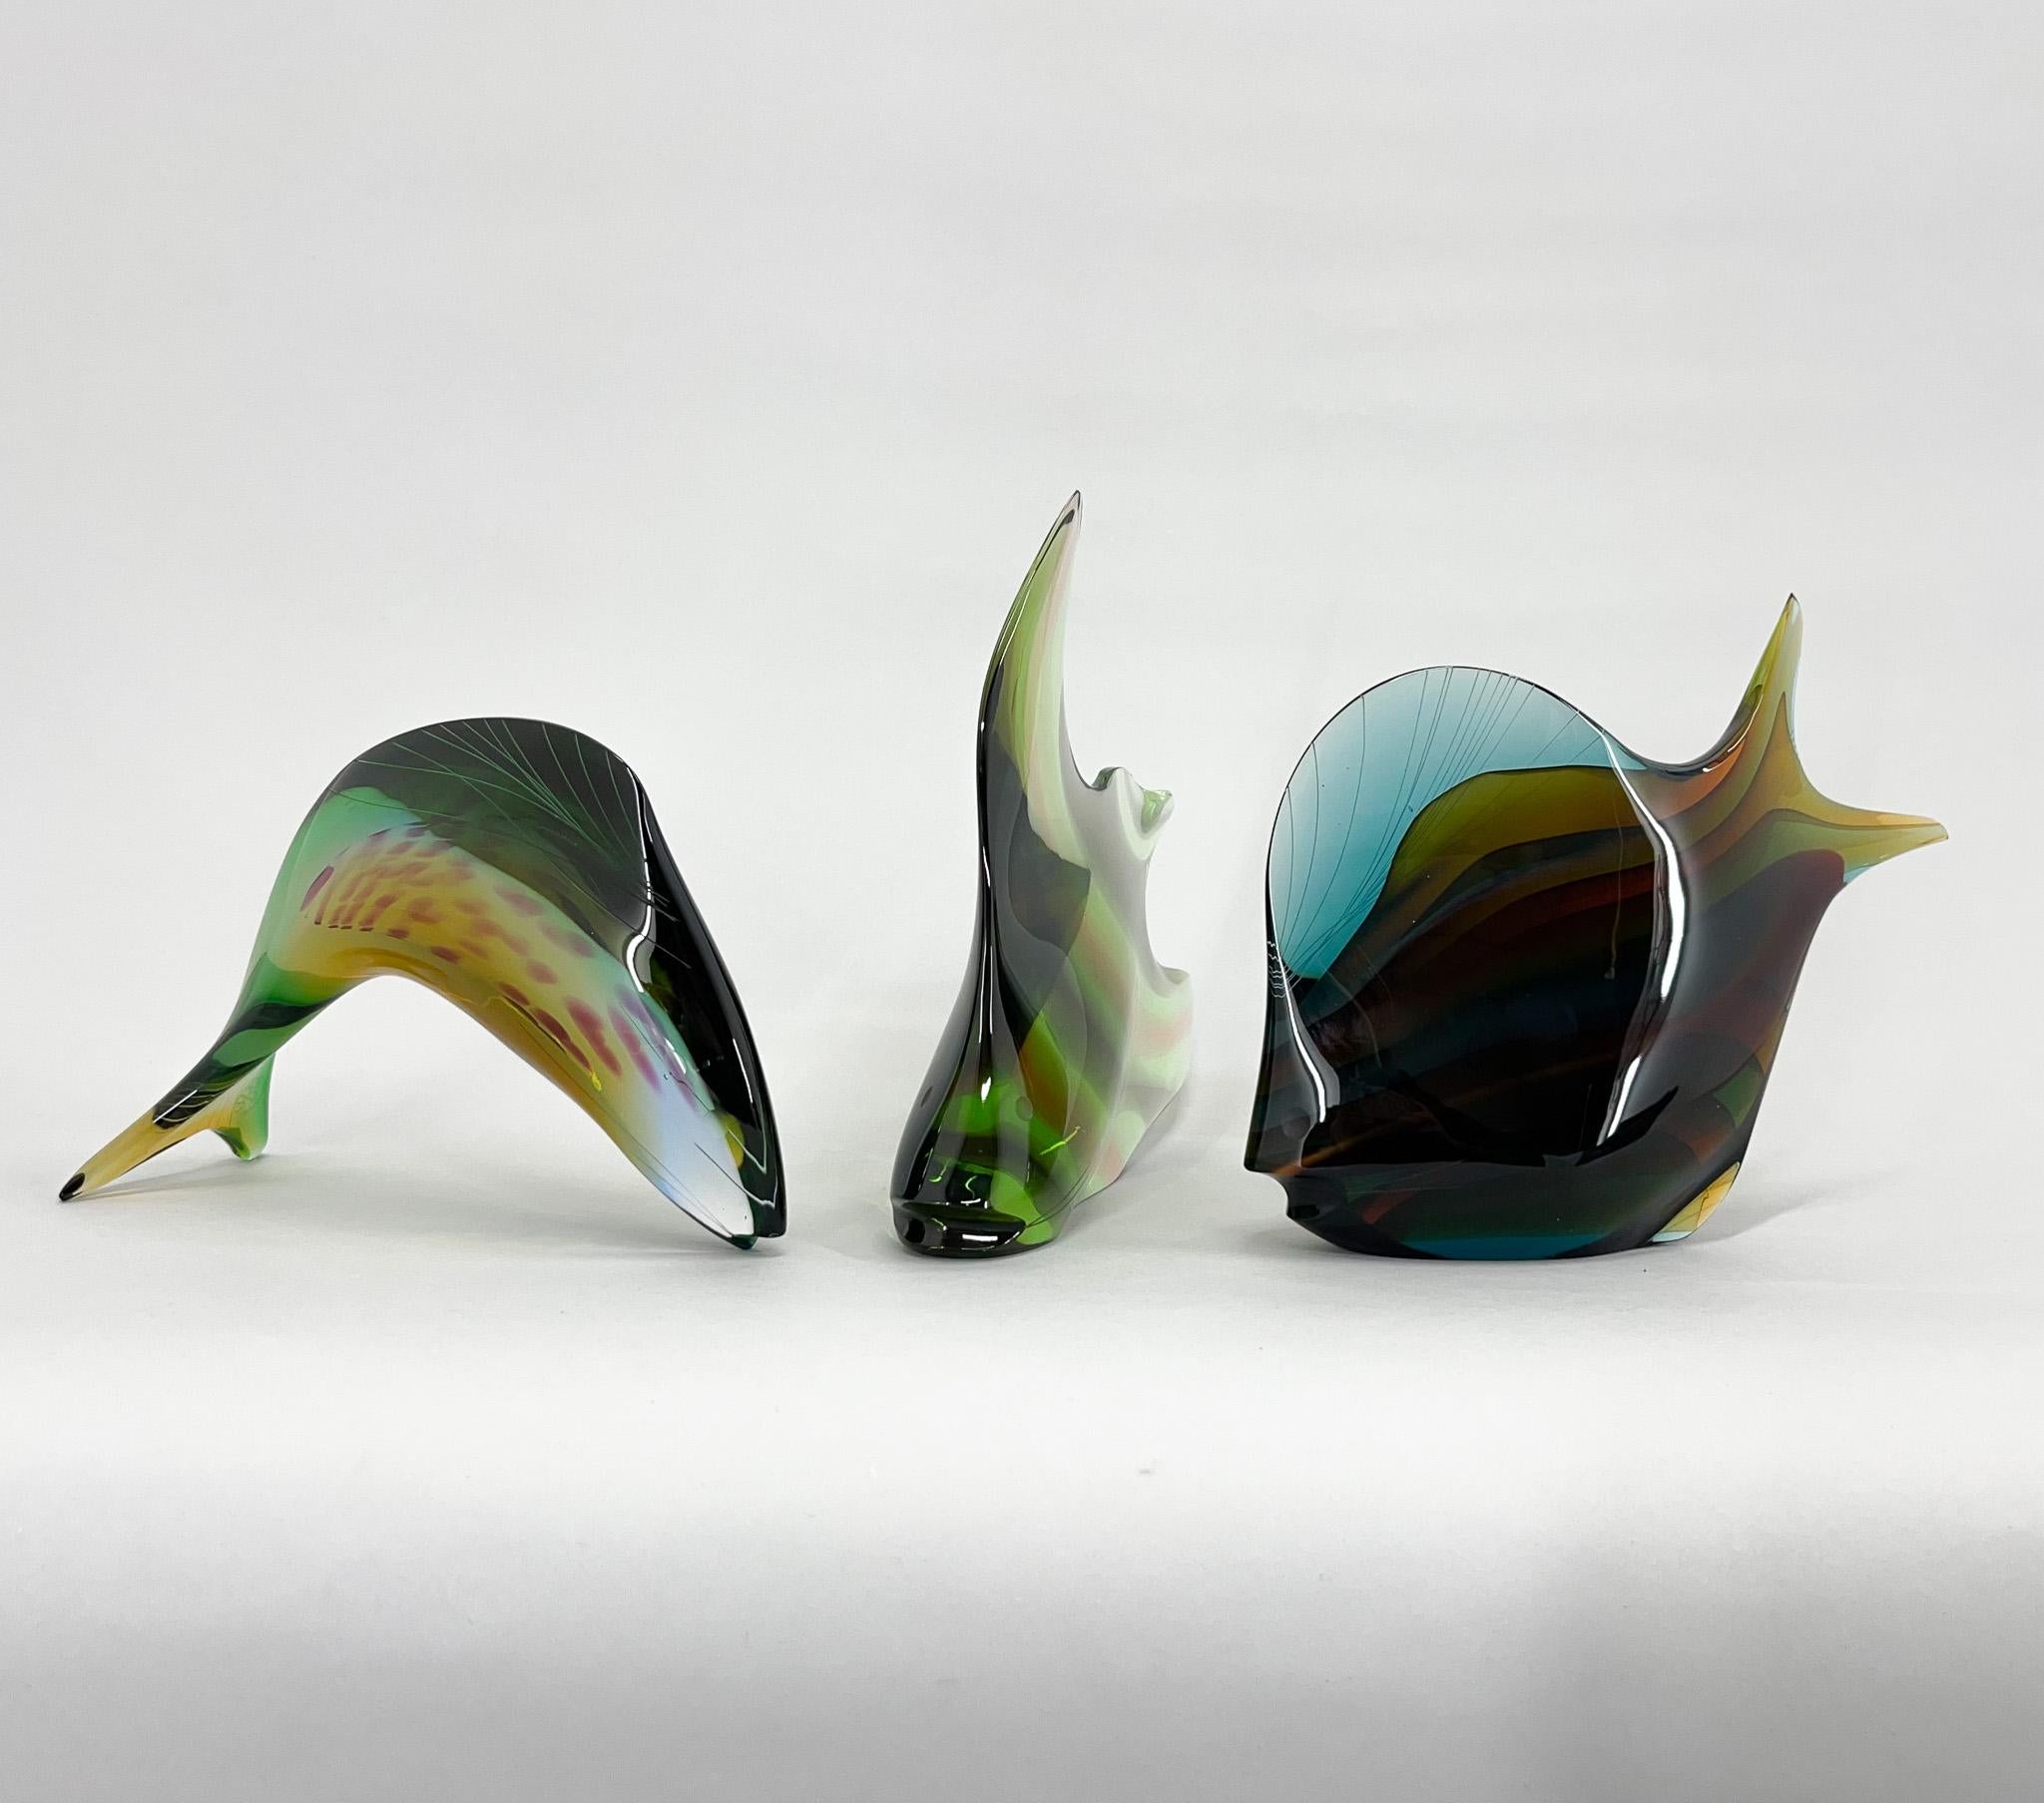 Set of three glass fish designed by academic painter and designer Stanislav Honzík in 1958. Produced by Nový Bor Glassworks in Czechoslovakia in the 1960's. Marked. 
The first fish (from the left on the primary image) is 15 cm high, 23 cm wide and